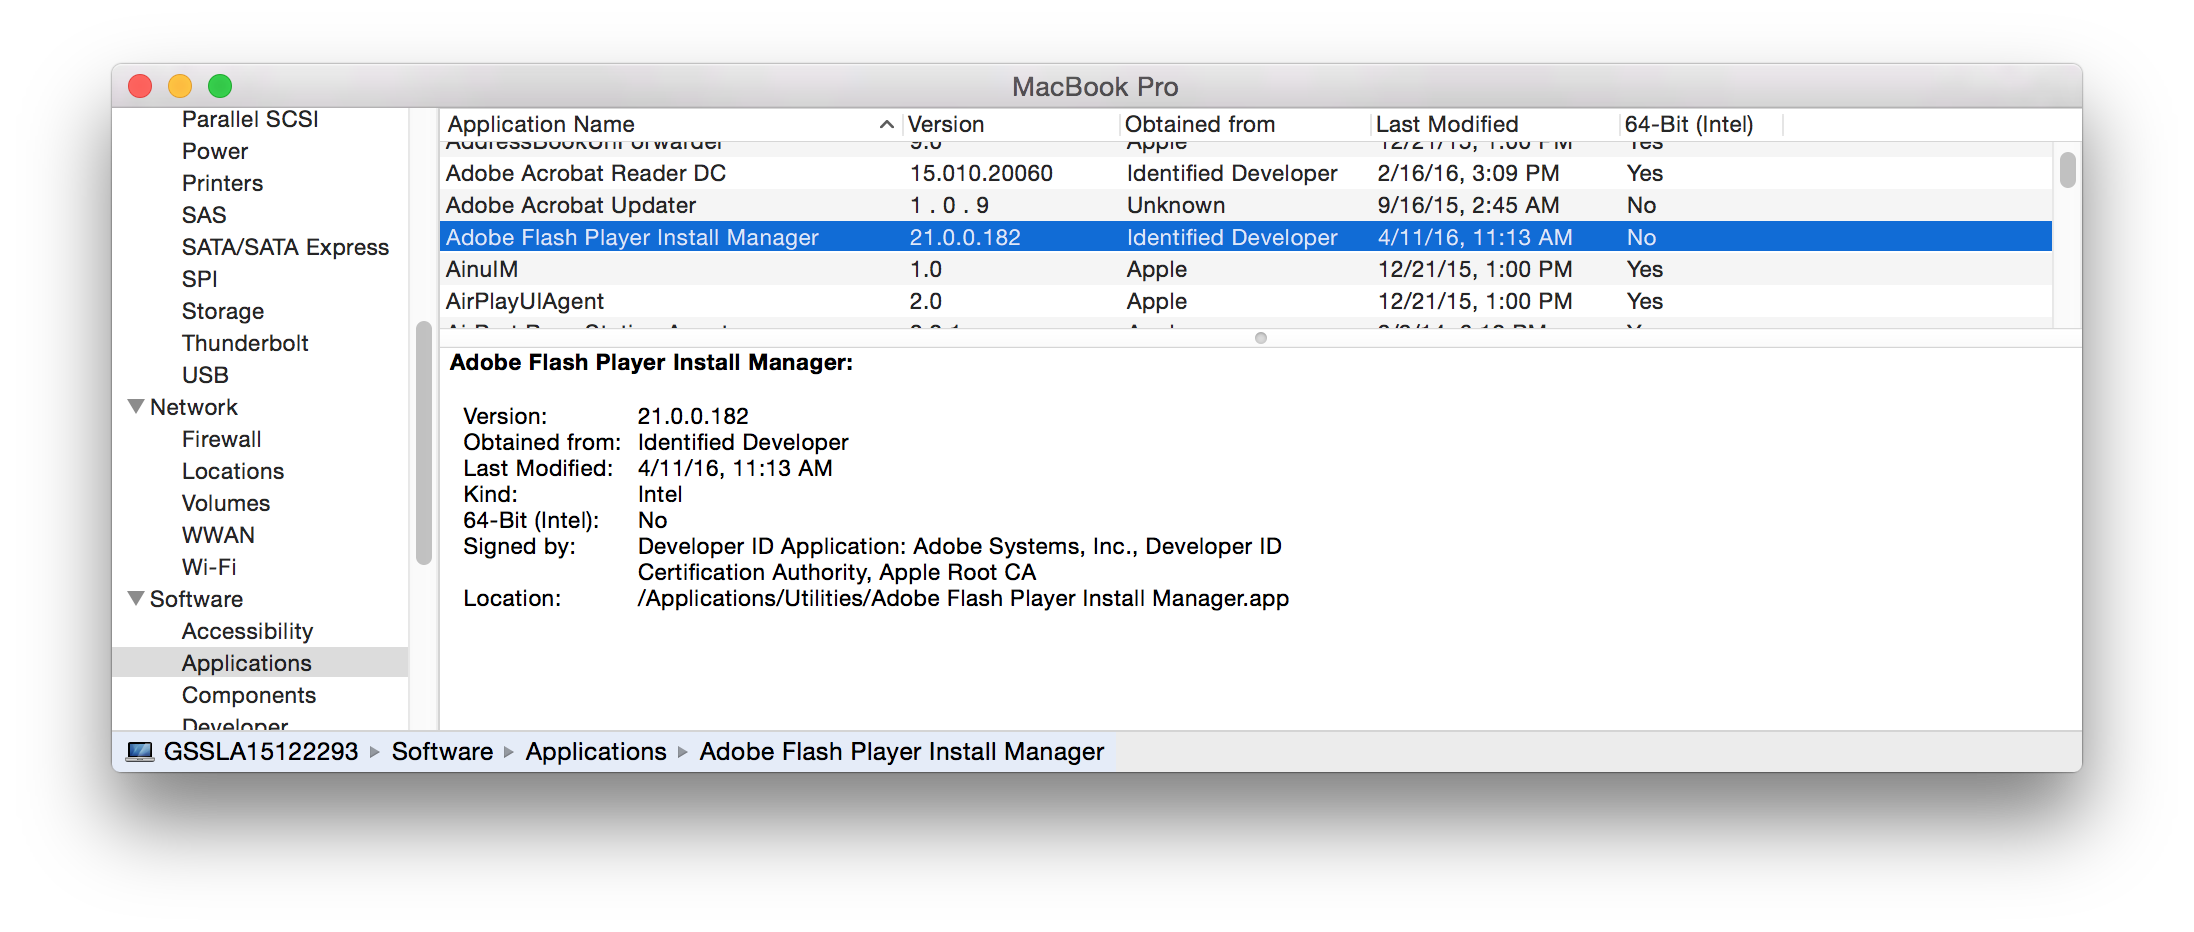 flash player for mac 10.9.4